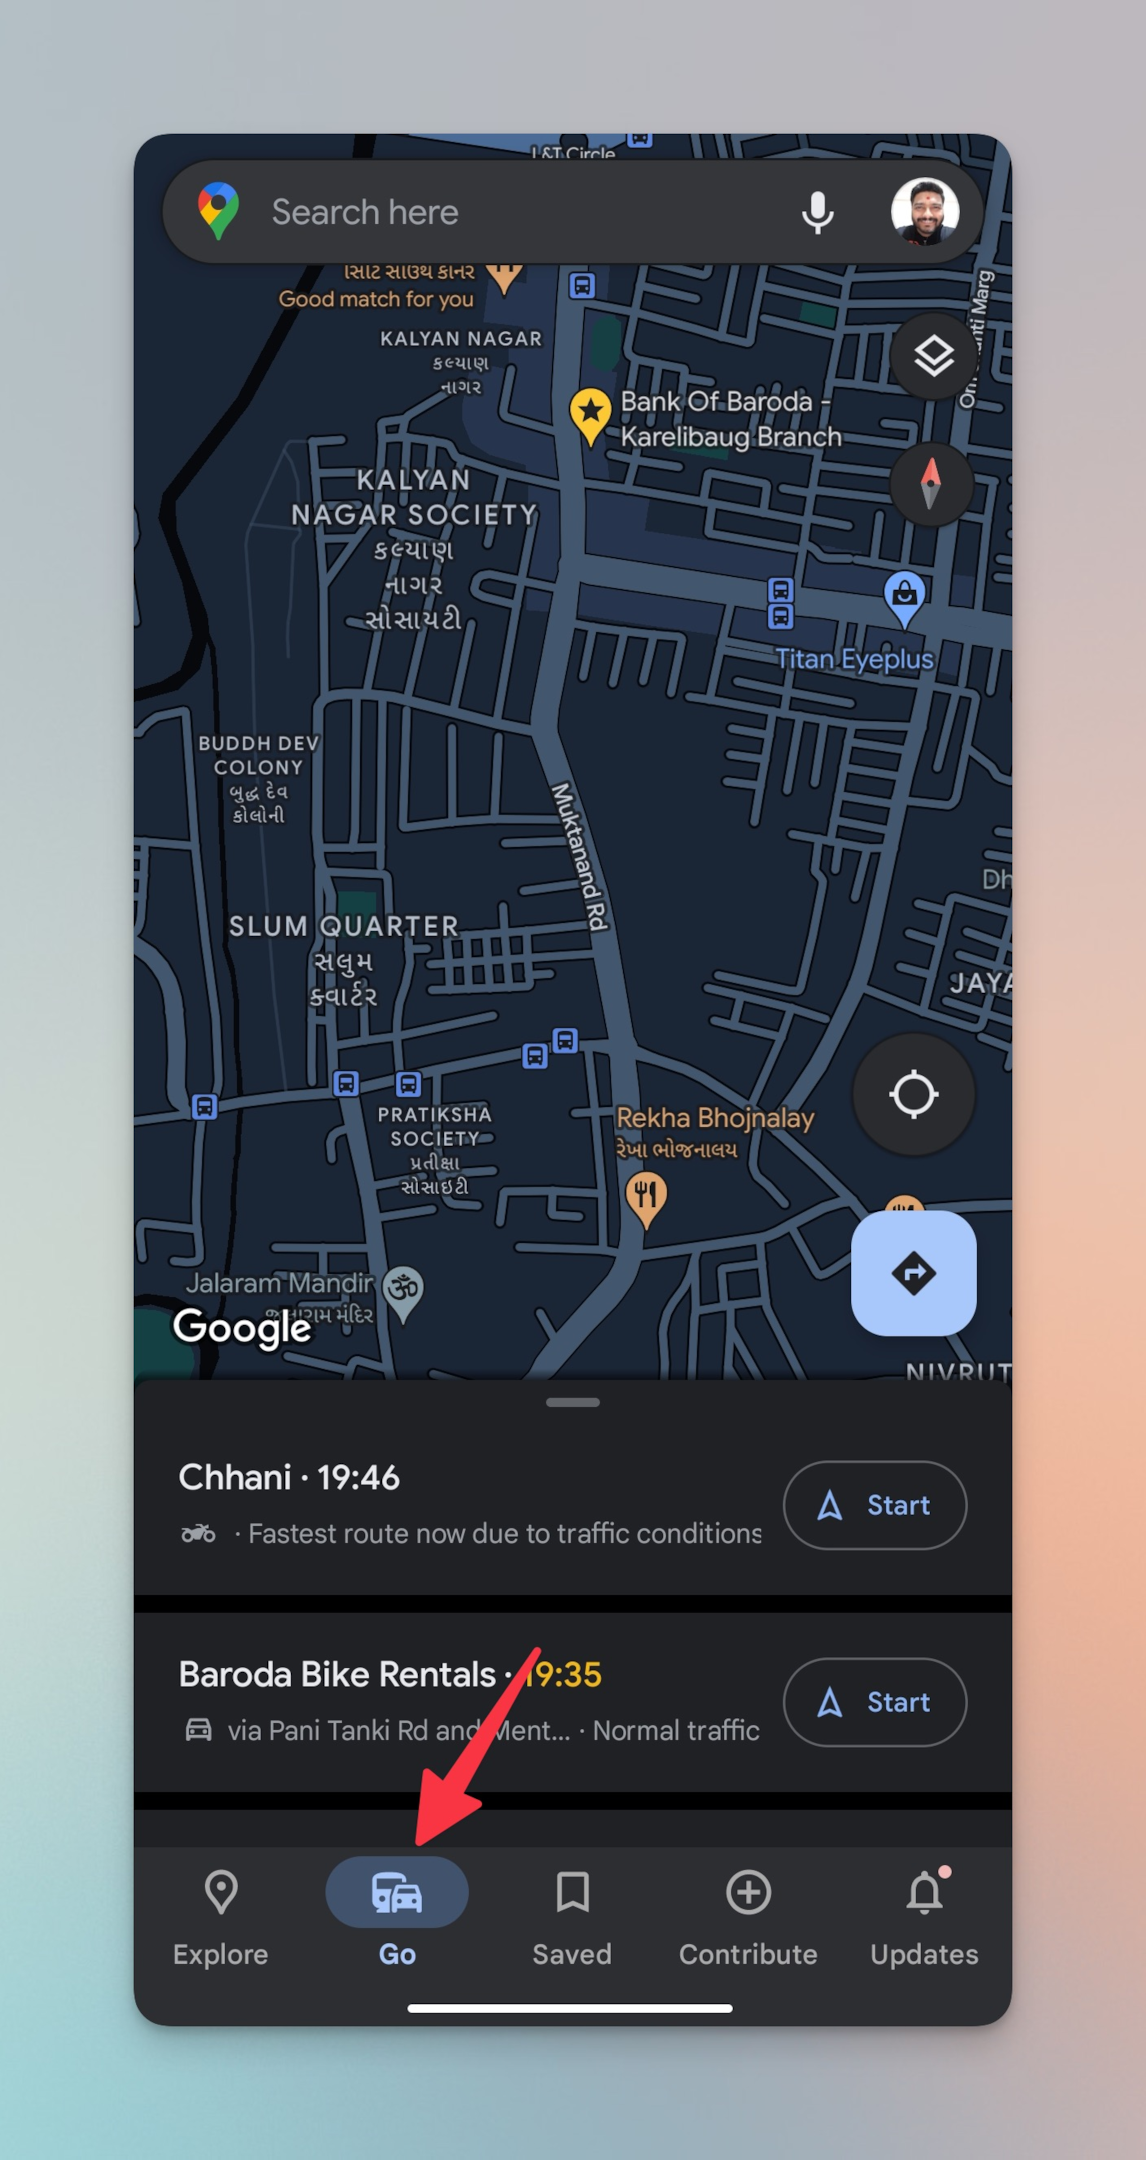 Remote.tools pointing to Go button to find all the pinned locations on Google maps